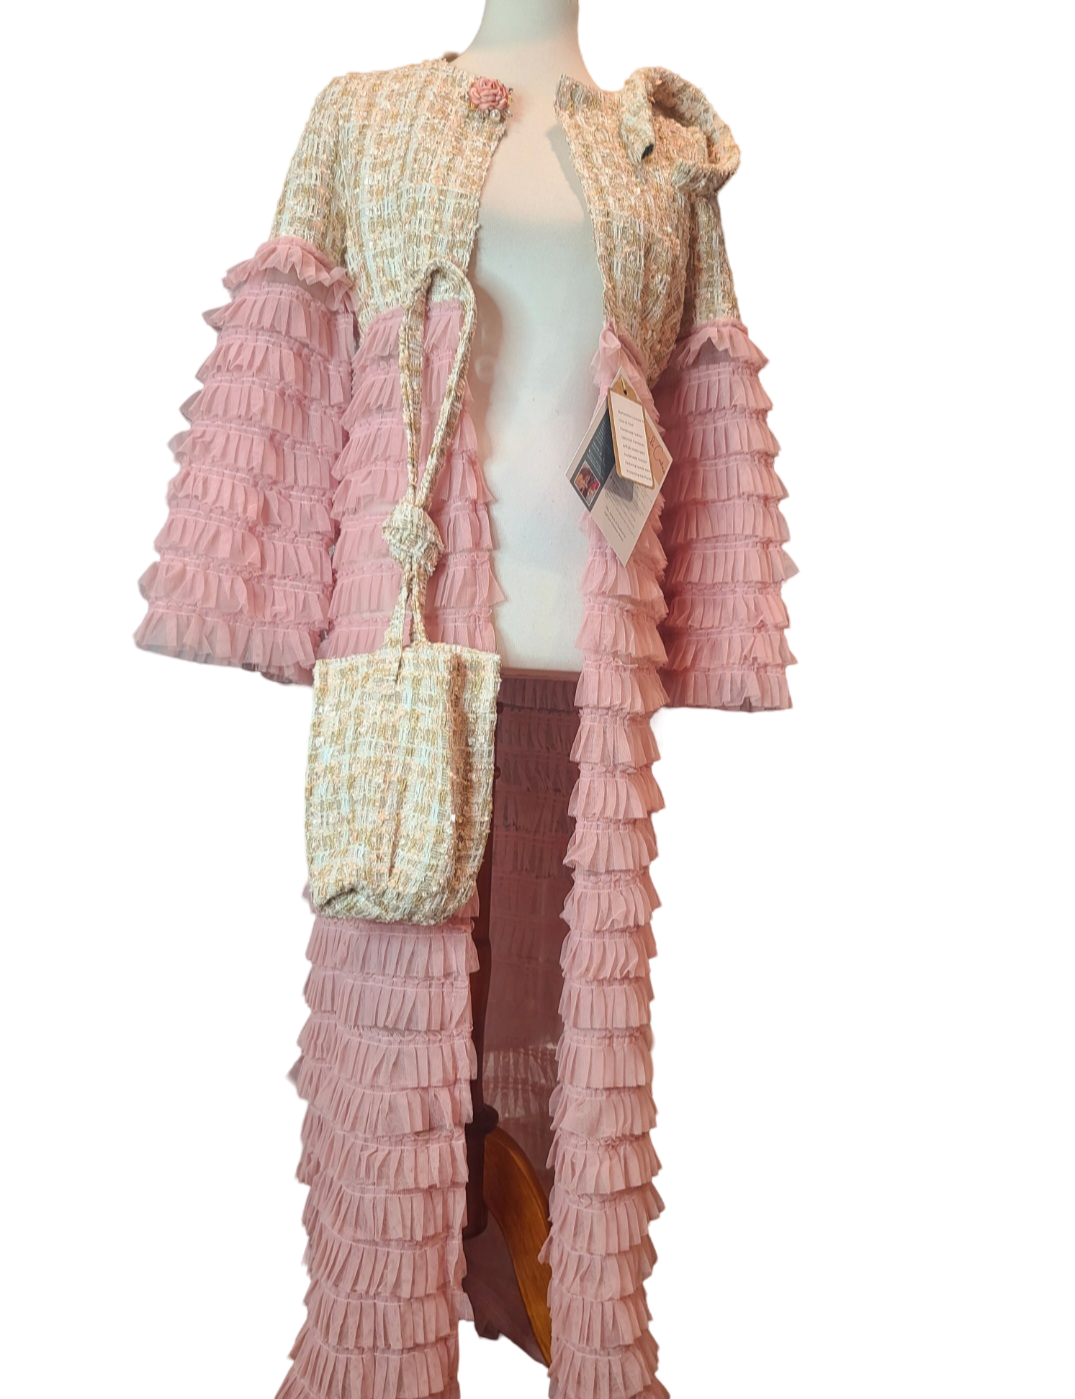 Luxury Cover Up Dress. Every summer needs new growth of flowers, fresh air, clean ocean and environmentally fashion. So, show up like chic ladies. This dress cover up is fantastic. Its the most feminine and eye catching ever.  Ruffles and soft pink...